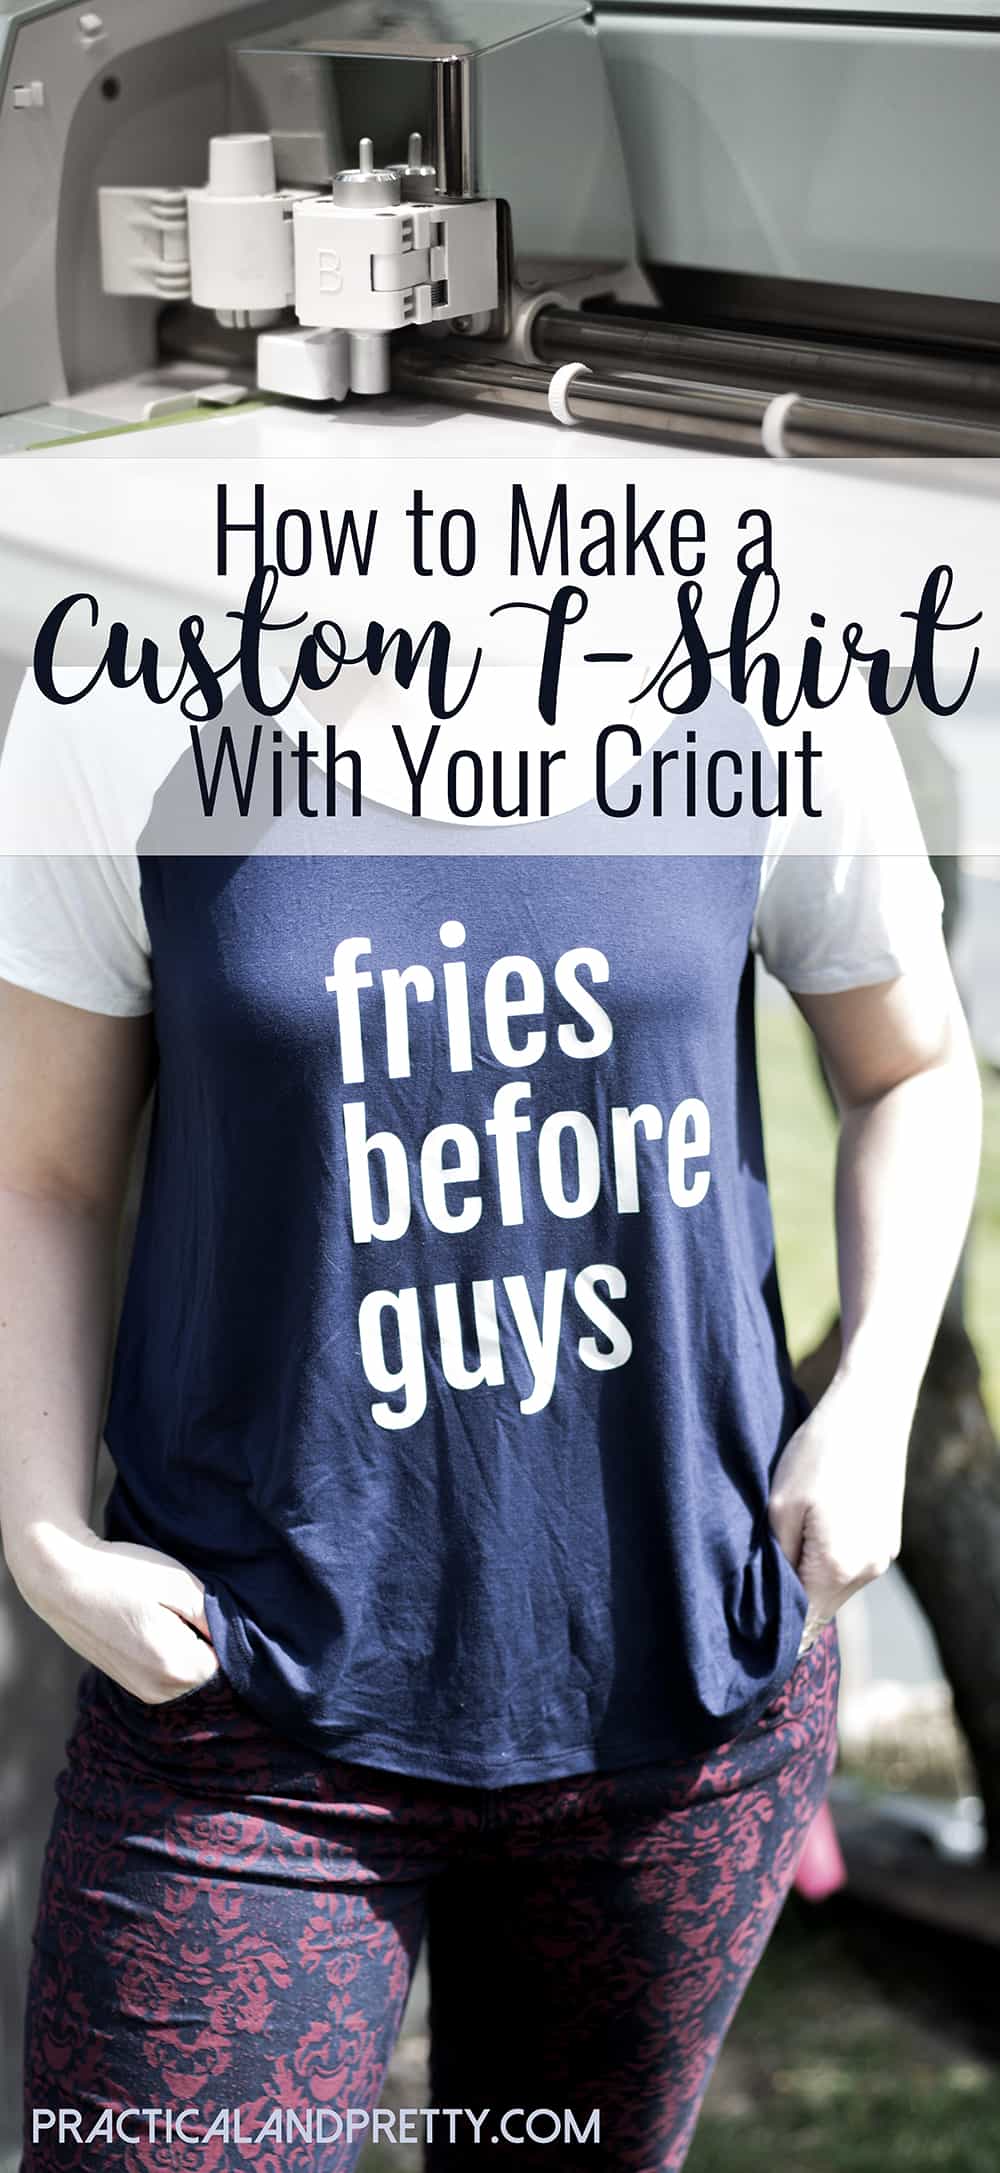 Creating your own shirt is so easy with the Cricut! My sister wanted this 'Fries Before Guys' shirt and it was a super easy gift.